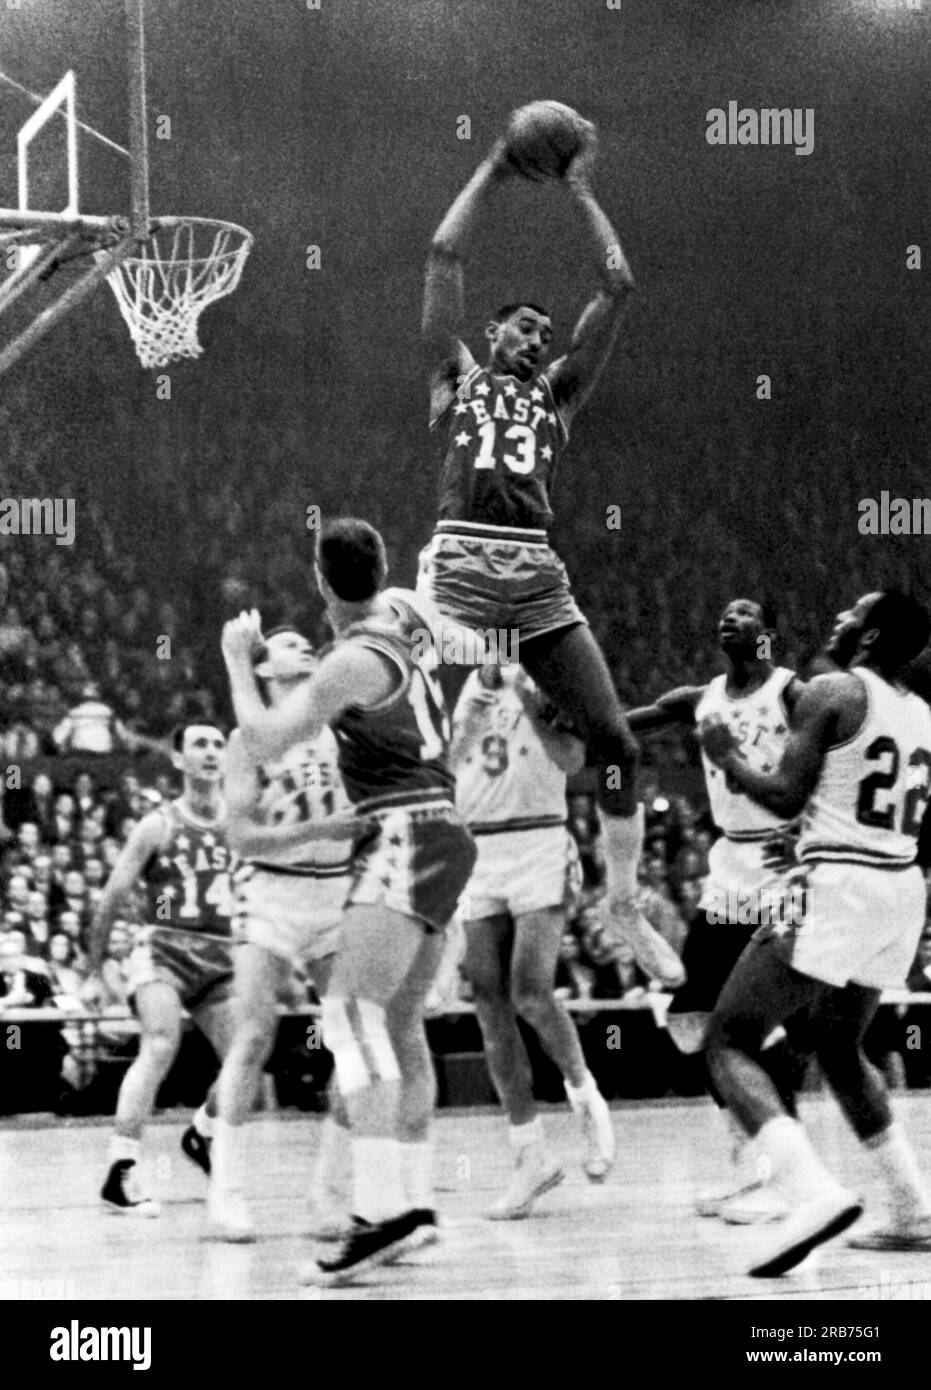 St. Louis, Missouri:  January 16, 1962 Wilt Chamberlain, Philadelphia (13), goes up high to snag a rebound in the NBA All-Star game. Below him are (l-r) Bob Cousy, Boston (14); Jerry West, Los Angeles (11); Tom Heinsohn,  Boston (15); Bob Pettit, St. Louis (9); Walt Bellamy, Chicago (8) and Elgin Baylor, Los Angeles (22). Stock Photo